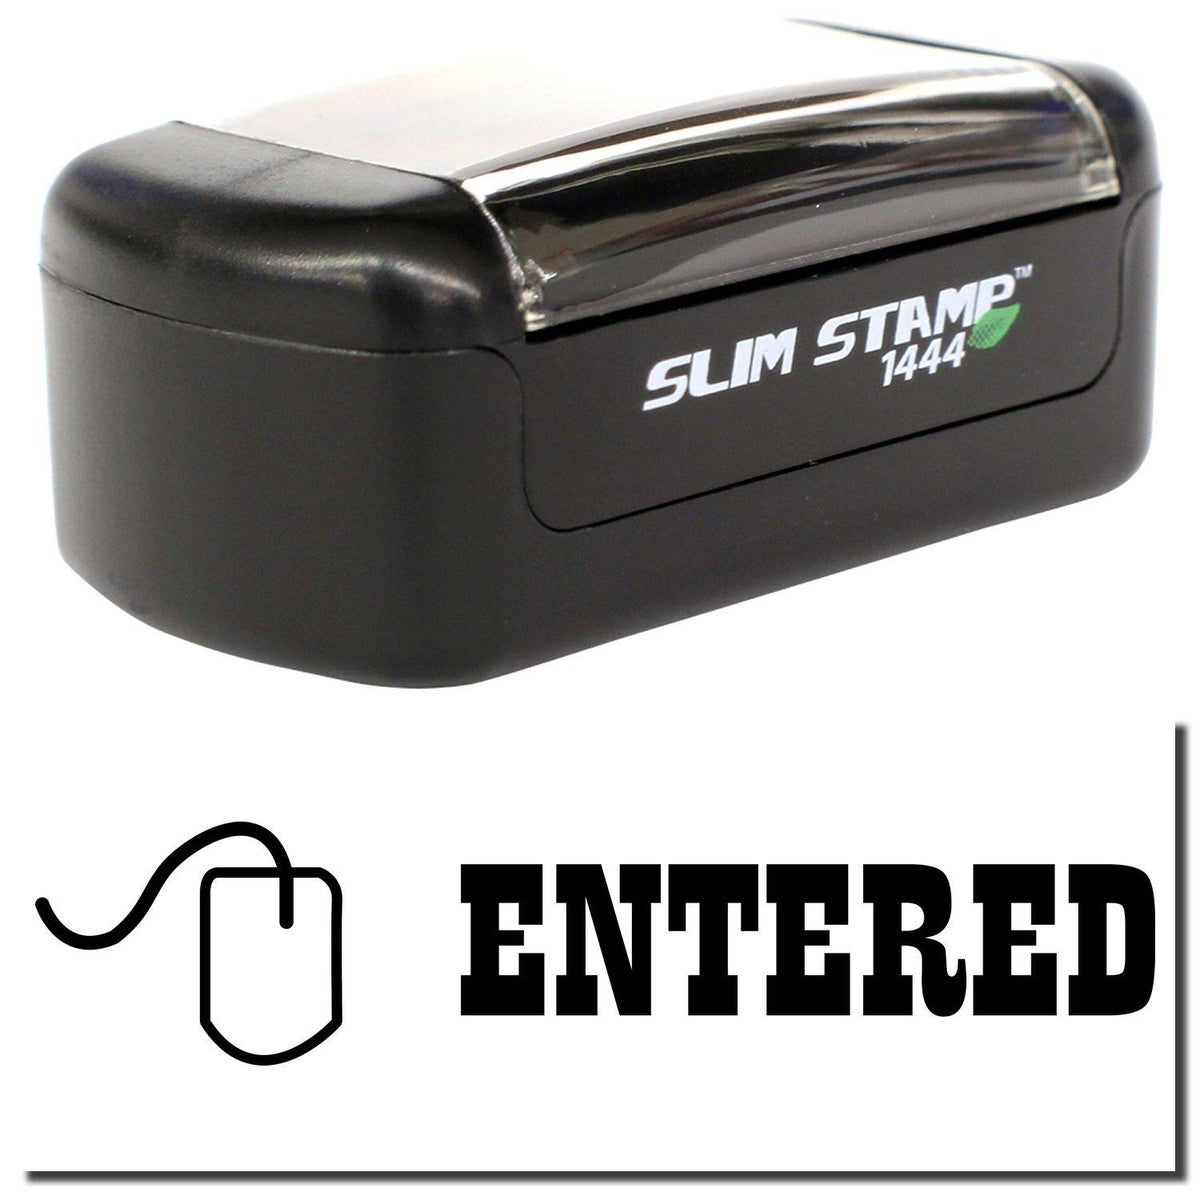 A stock office pre-inked stamp with a stamped image showing how the text &quot;ENTERED&quot; with a small icon of a mouse on the left side is displayed after stamping.